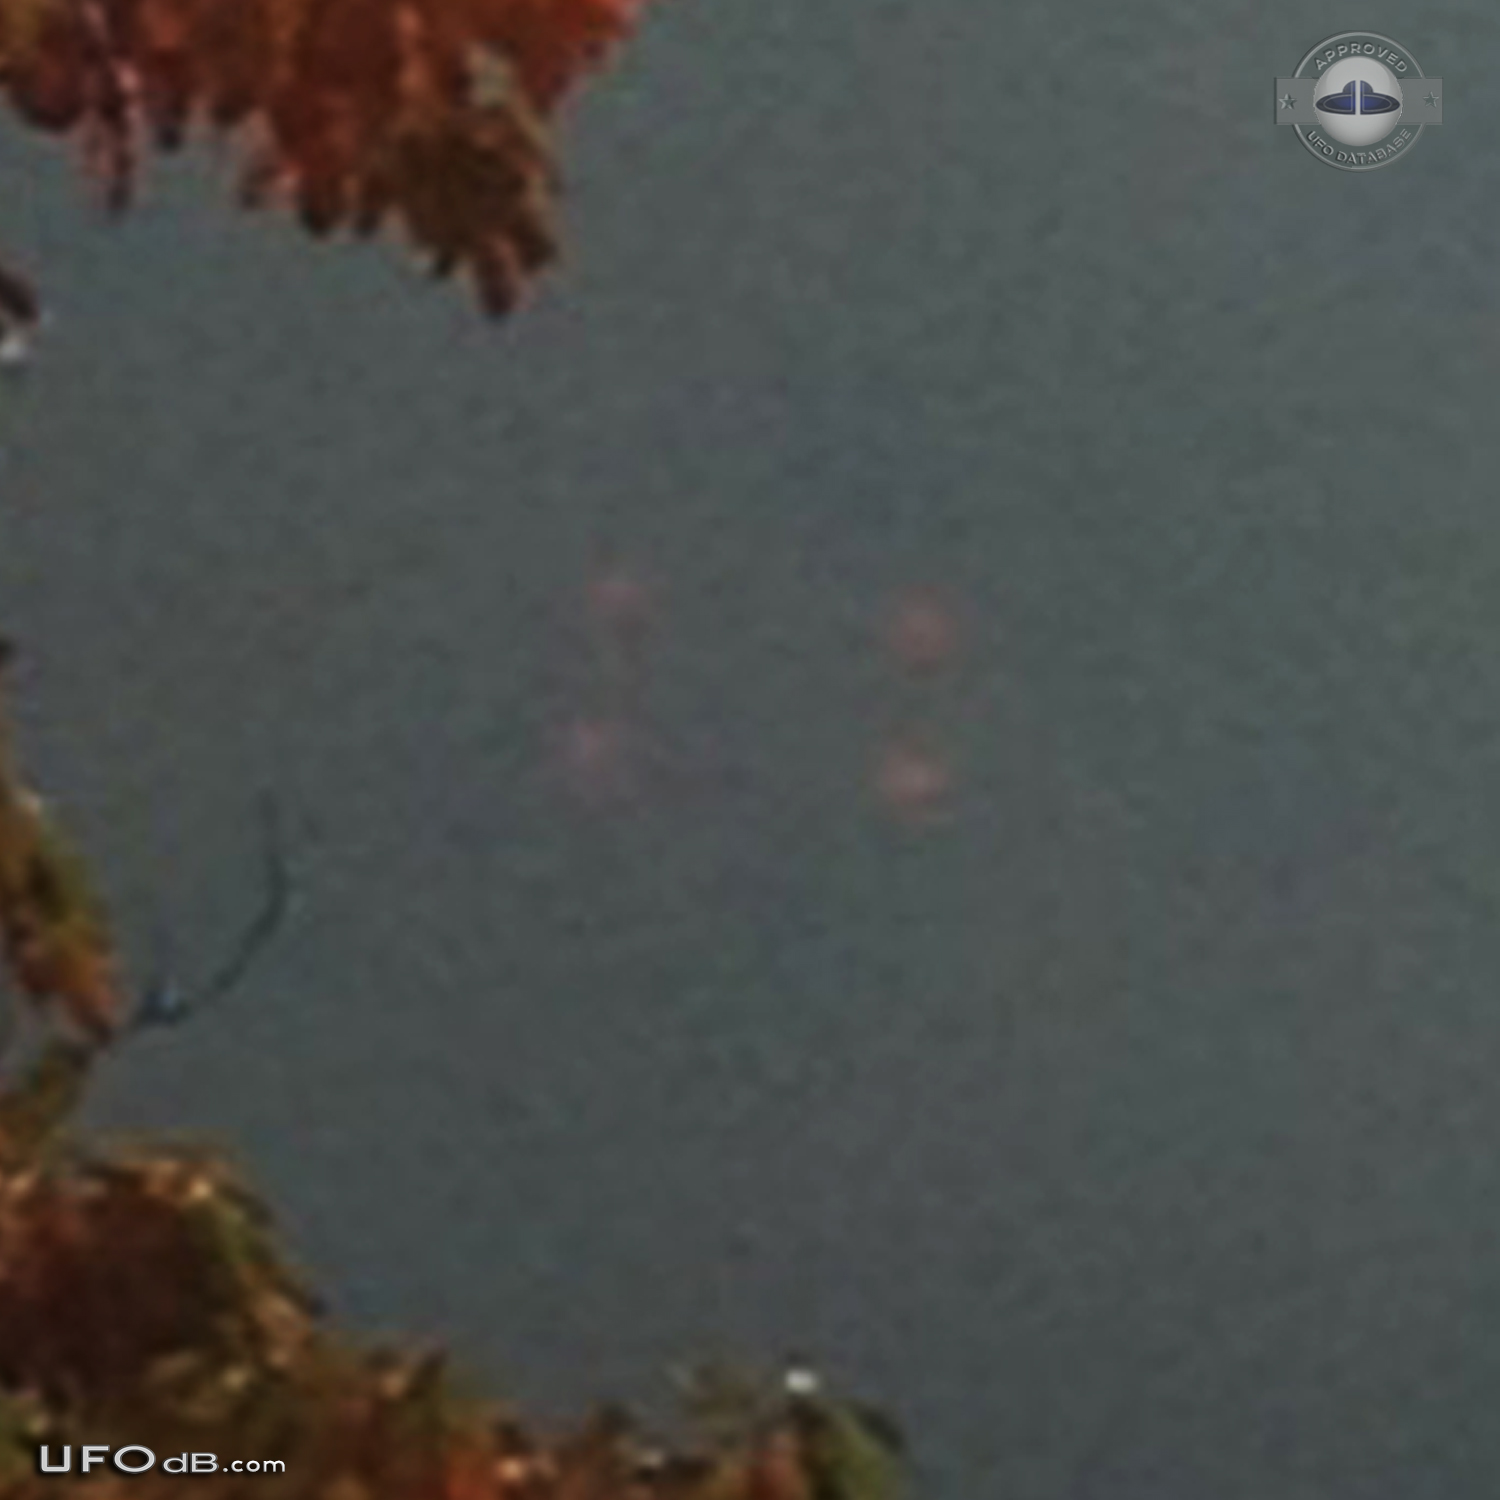 UFO made of 4 red dots in the grey sky of Bellmawr New Jersey USA 2012 UFO Picture #508-3